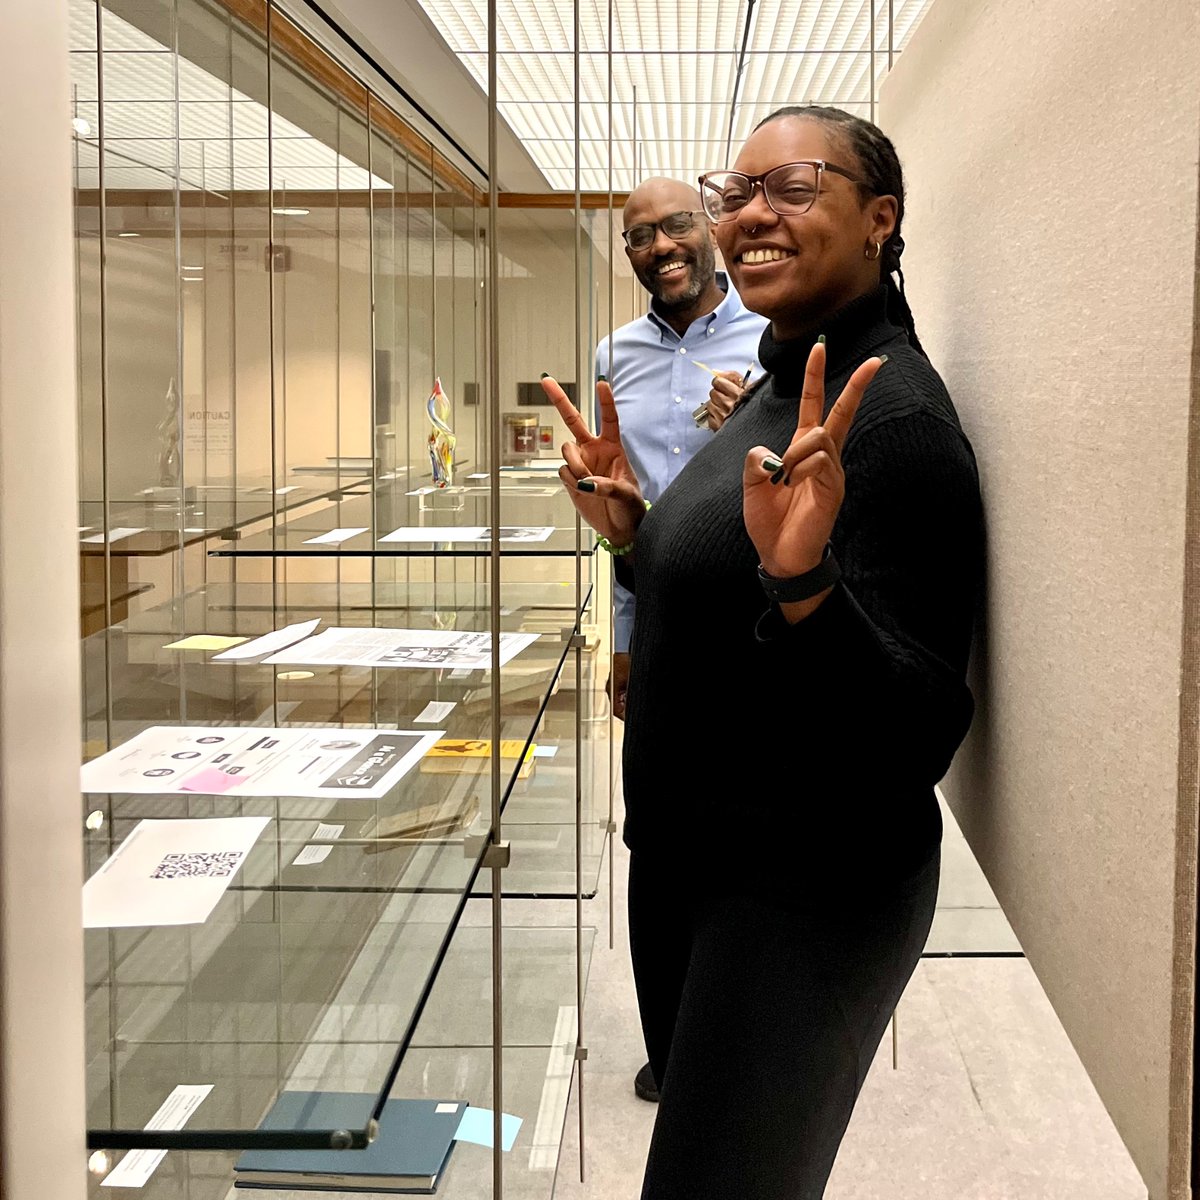 This week @MonetTimmons & @CurtisSmall are installing Monet’s doctoral exhibition, “Alice Dunbar-Nelson and the Legacy of Black Women’s Archives,” exploring cross-generational Black feminist memory work and care. Opens Feb 6 @UDLibrary, so don’t miss! exhibitions.lib.udel.edu/alice-dunbar-n…